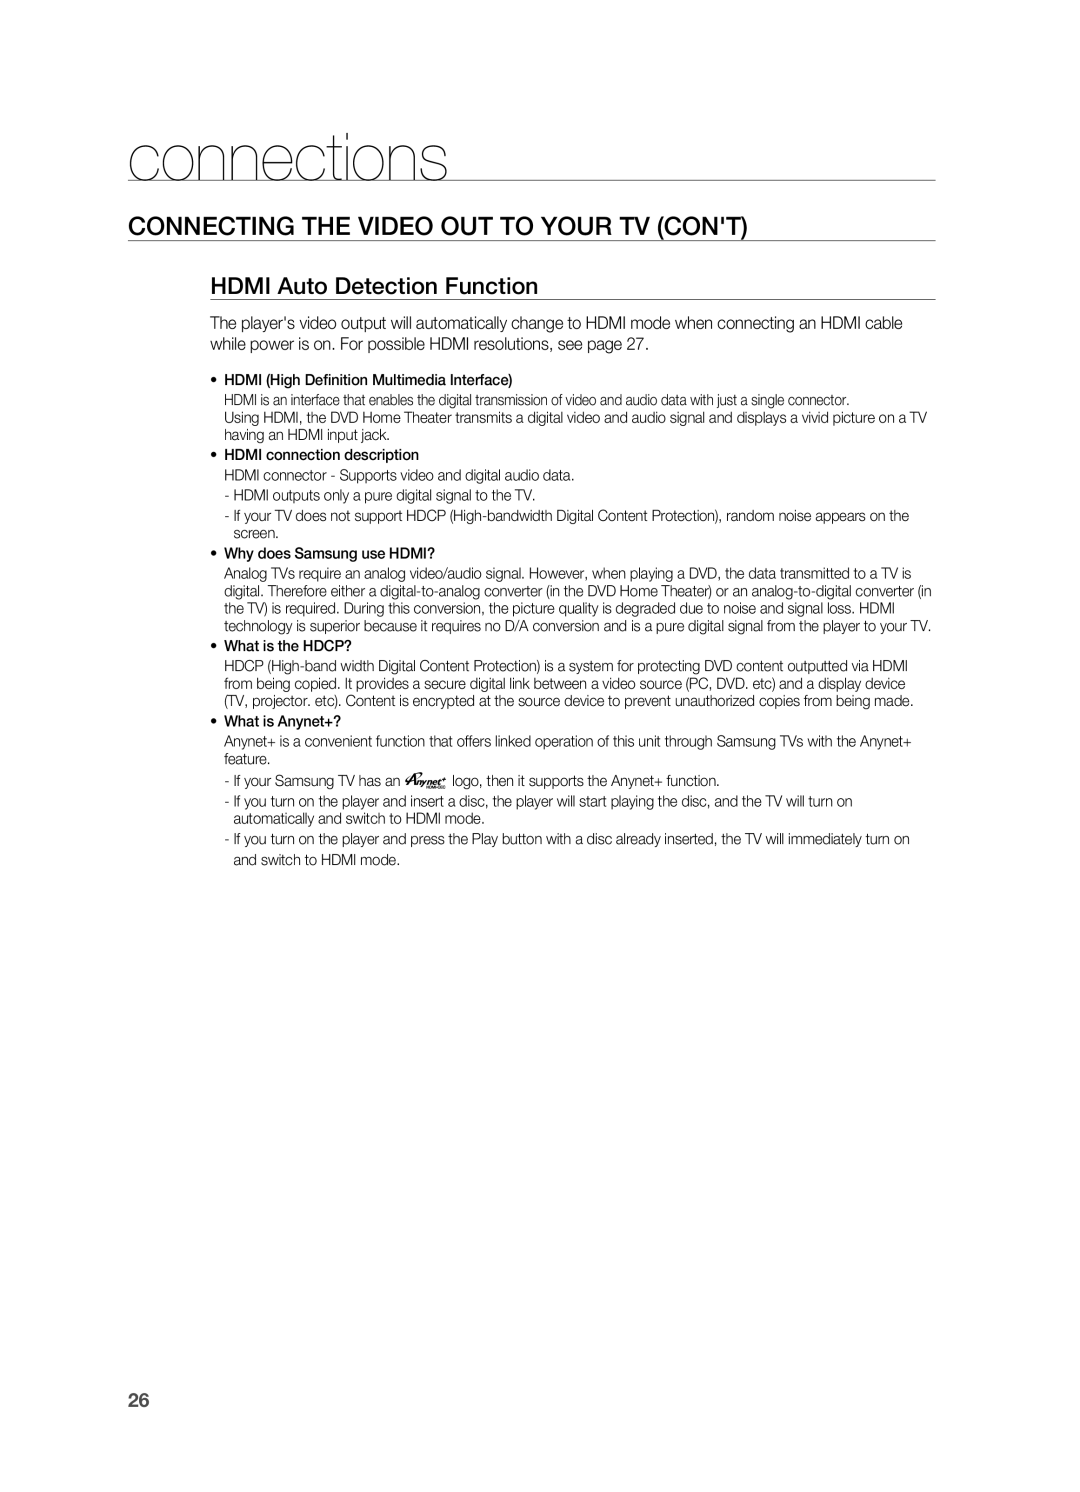 Samsung HT-TWZ315 manual Connecting the Video Out to your TV CONt, HDMI Auto Detection Function, connections 